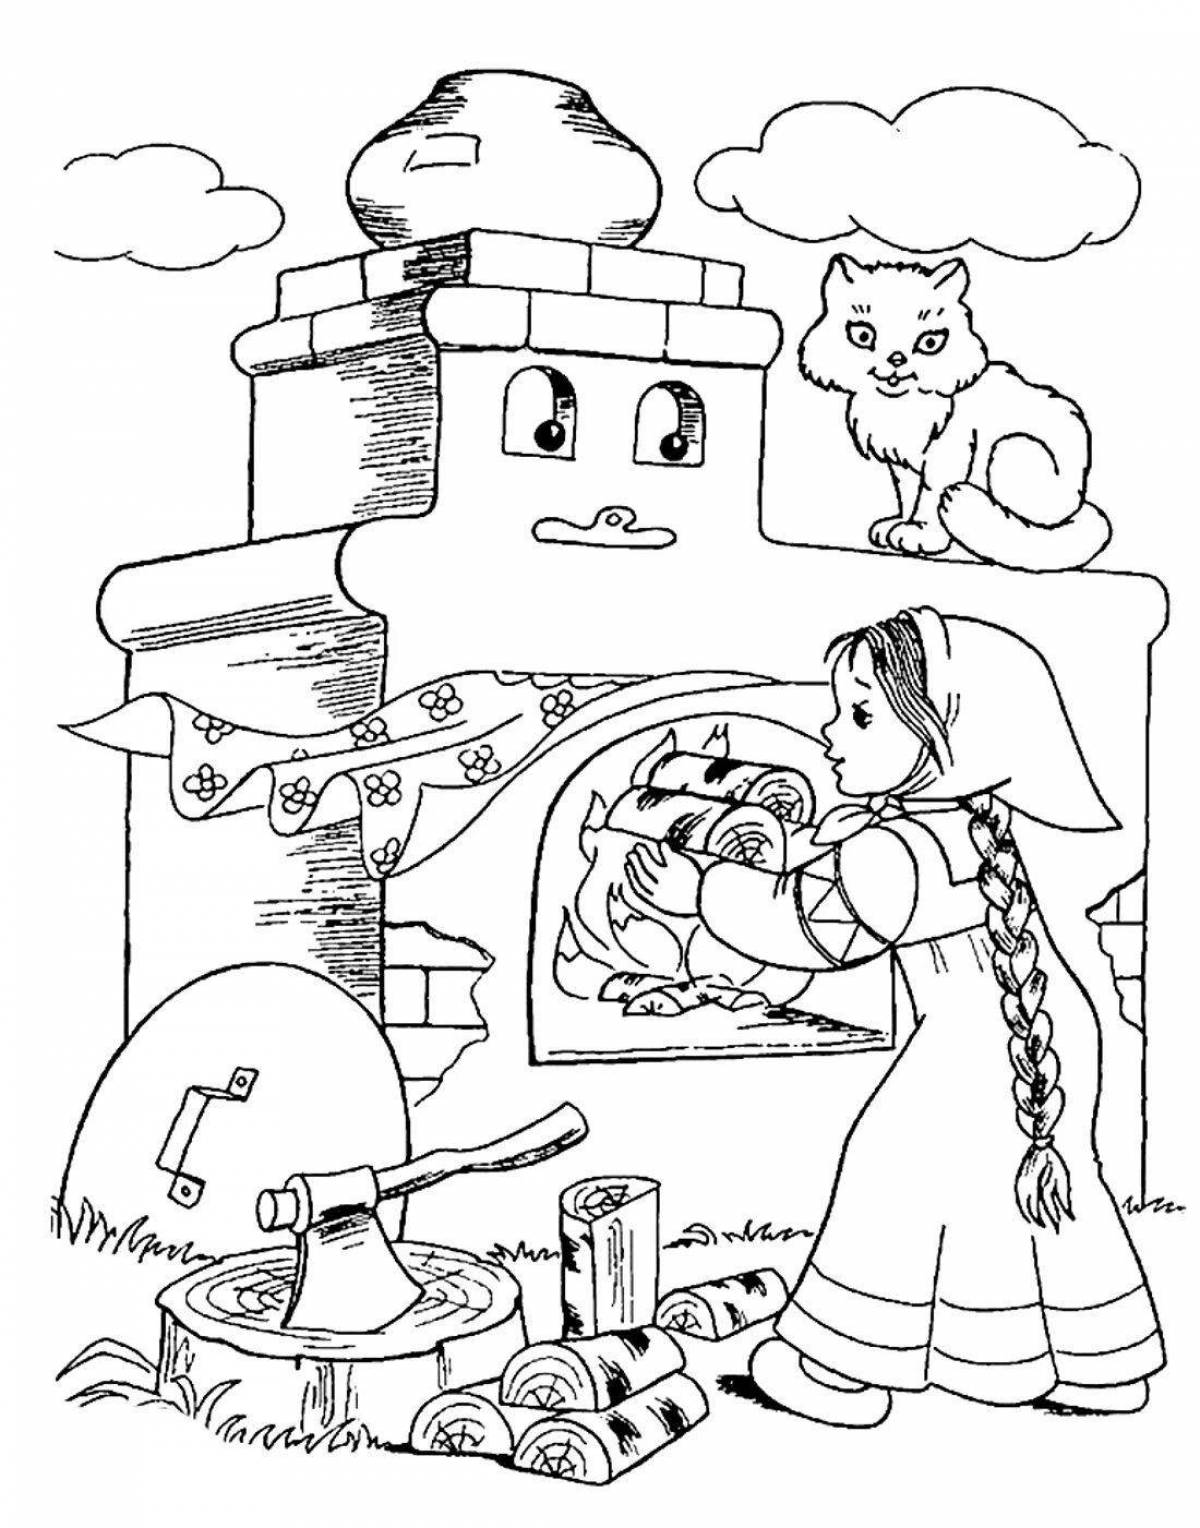 Joyful oven coloring book for kids